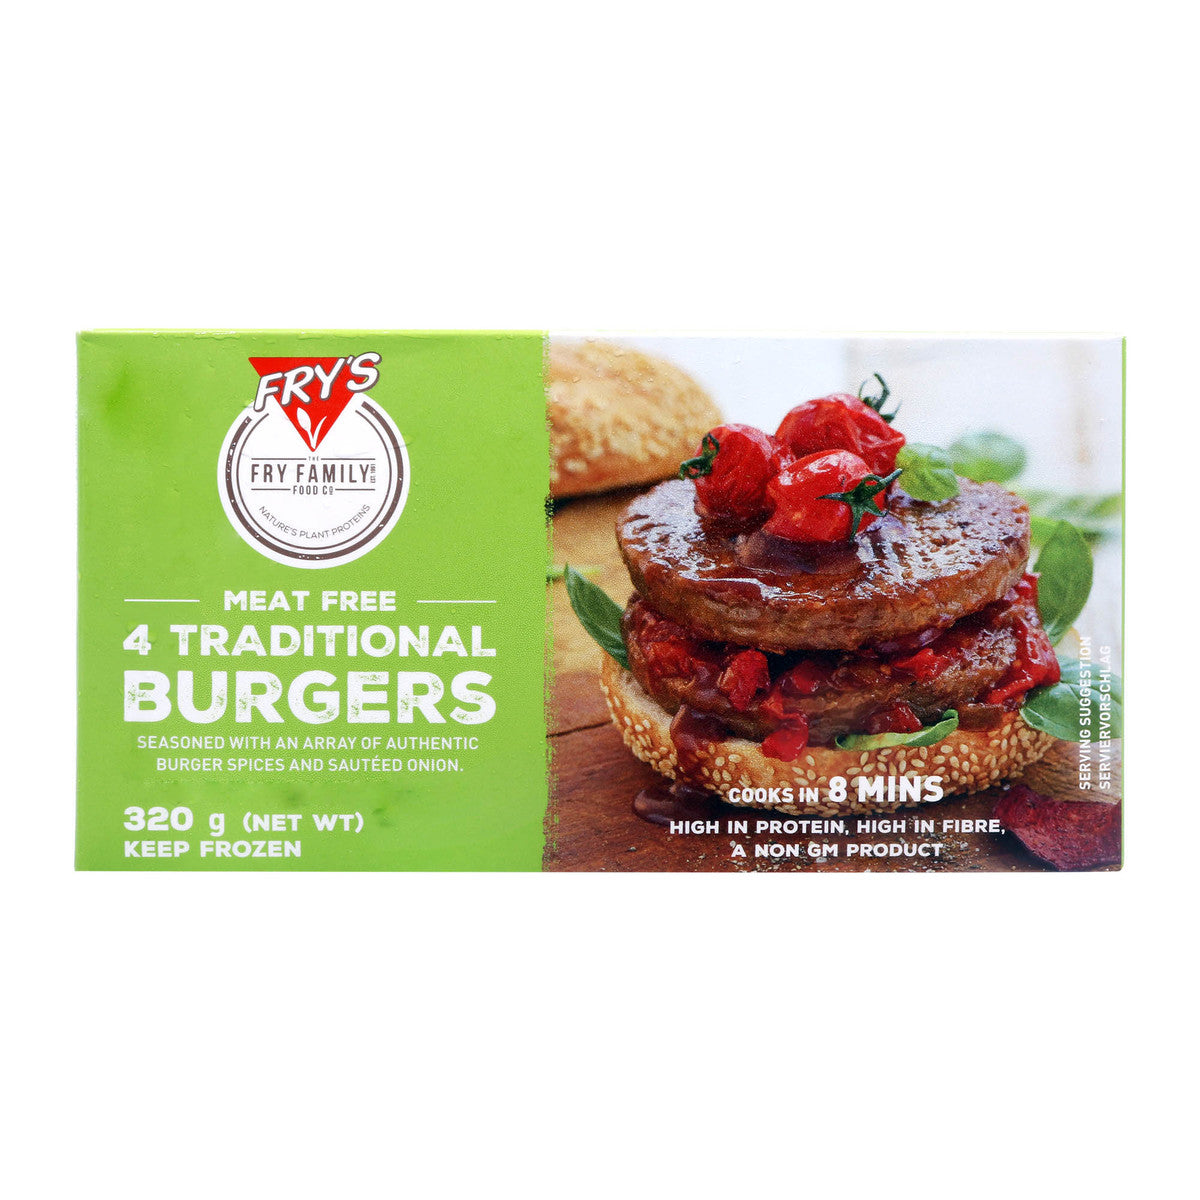 FRY'S Family Meat-free 4 Tradition Burgers, 320g